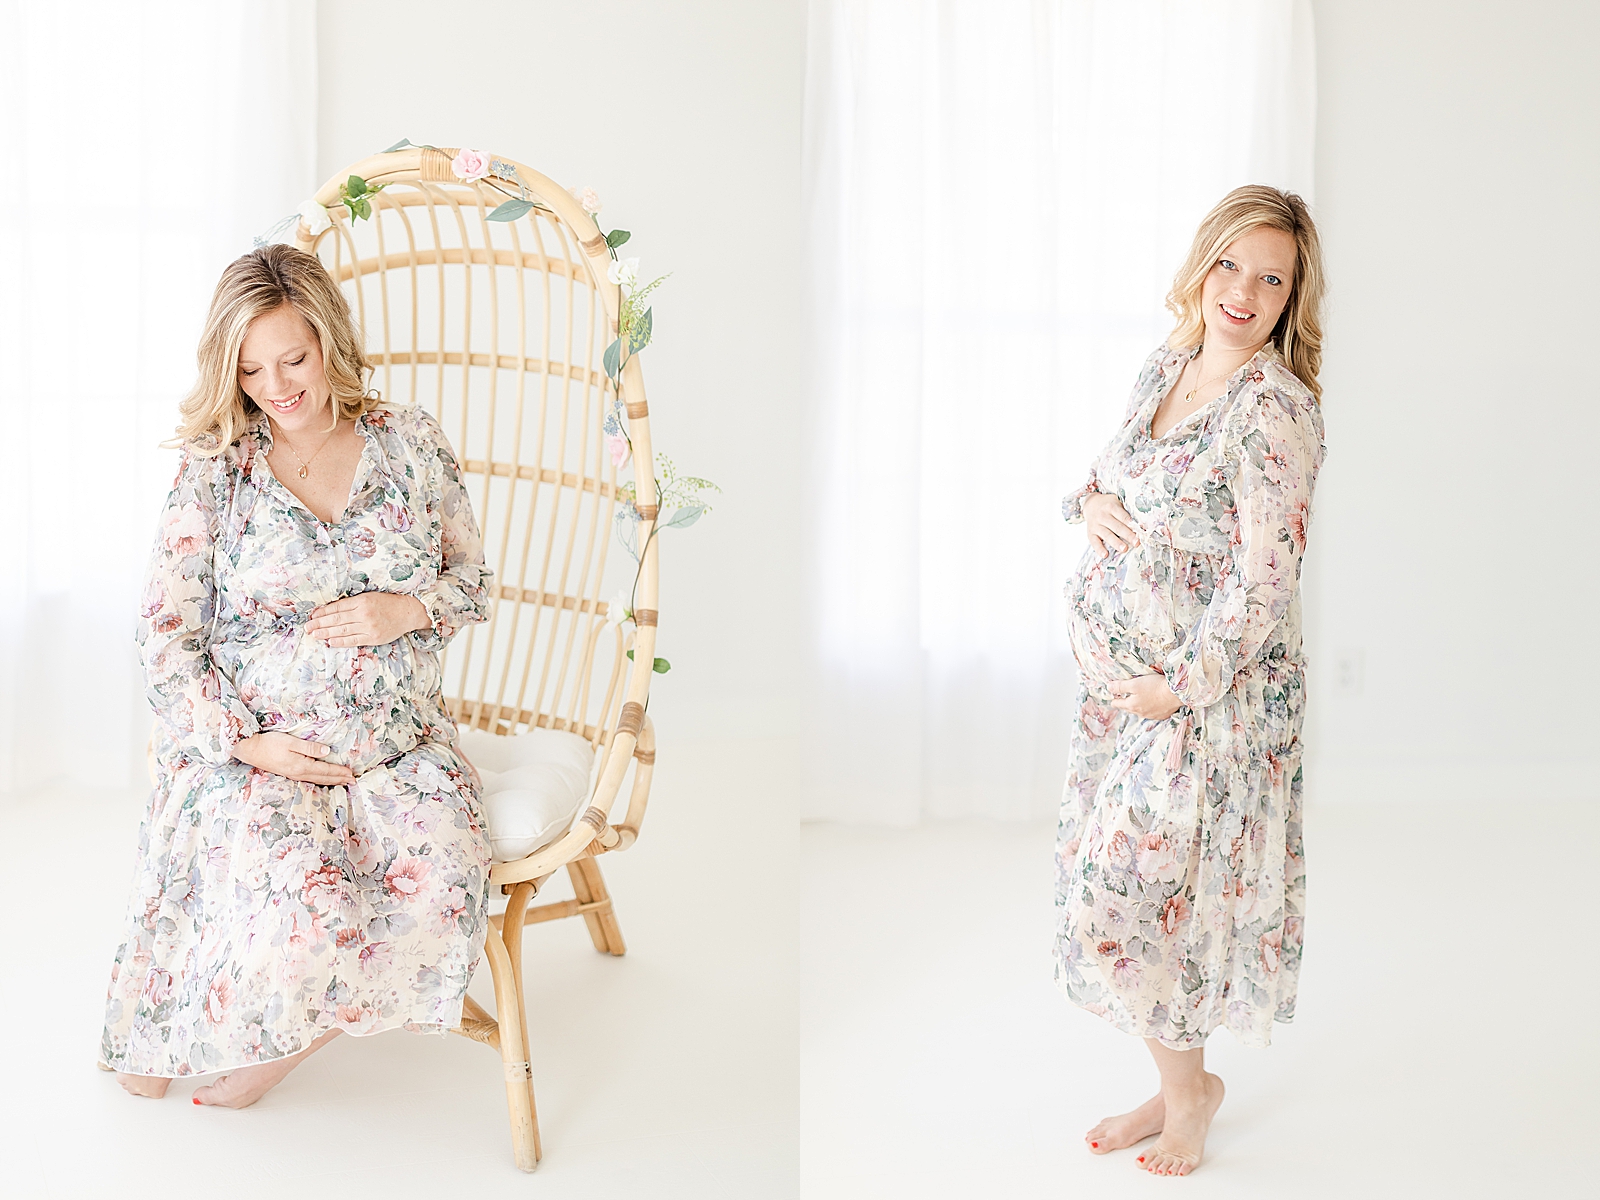 mom sitting in boho chair for maternity photos wearing floral dress holding and looking down at baby bump and standing holding baby bump smiling at camera